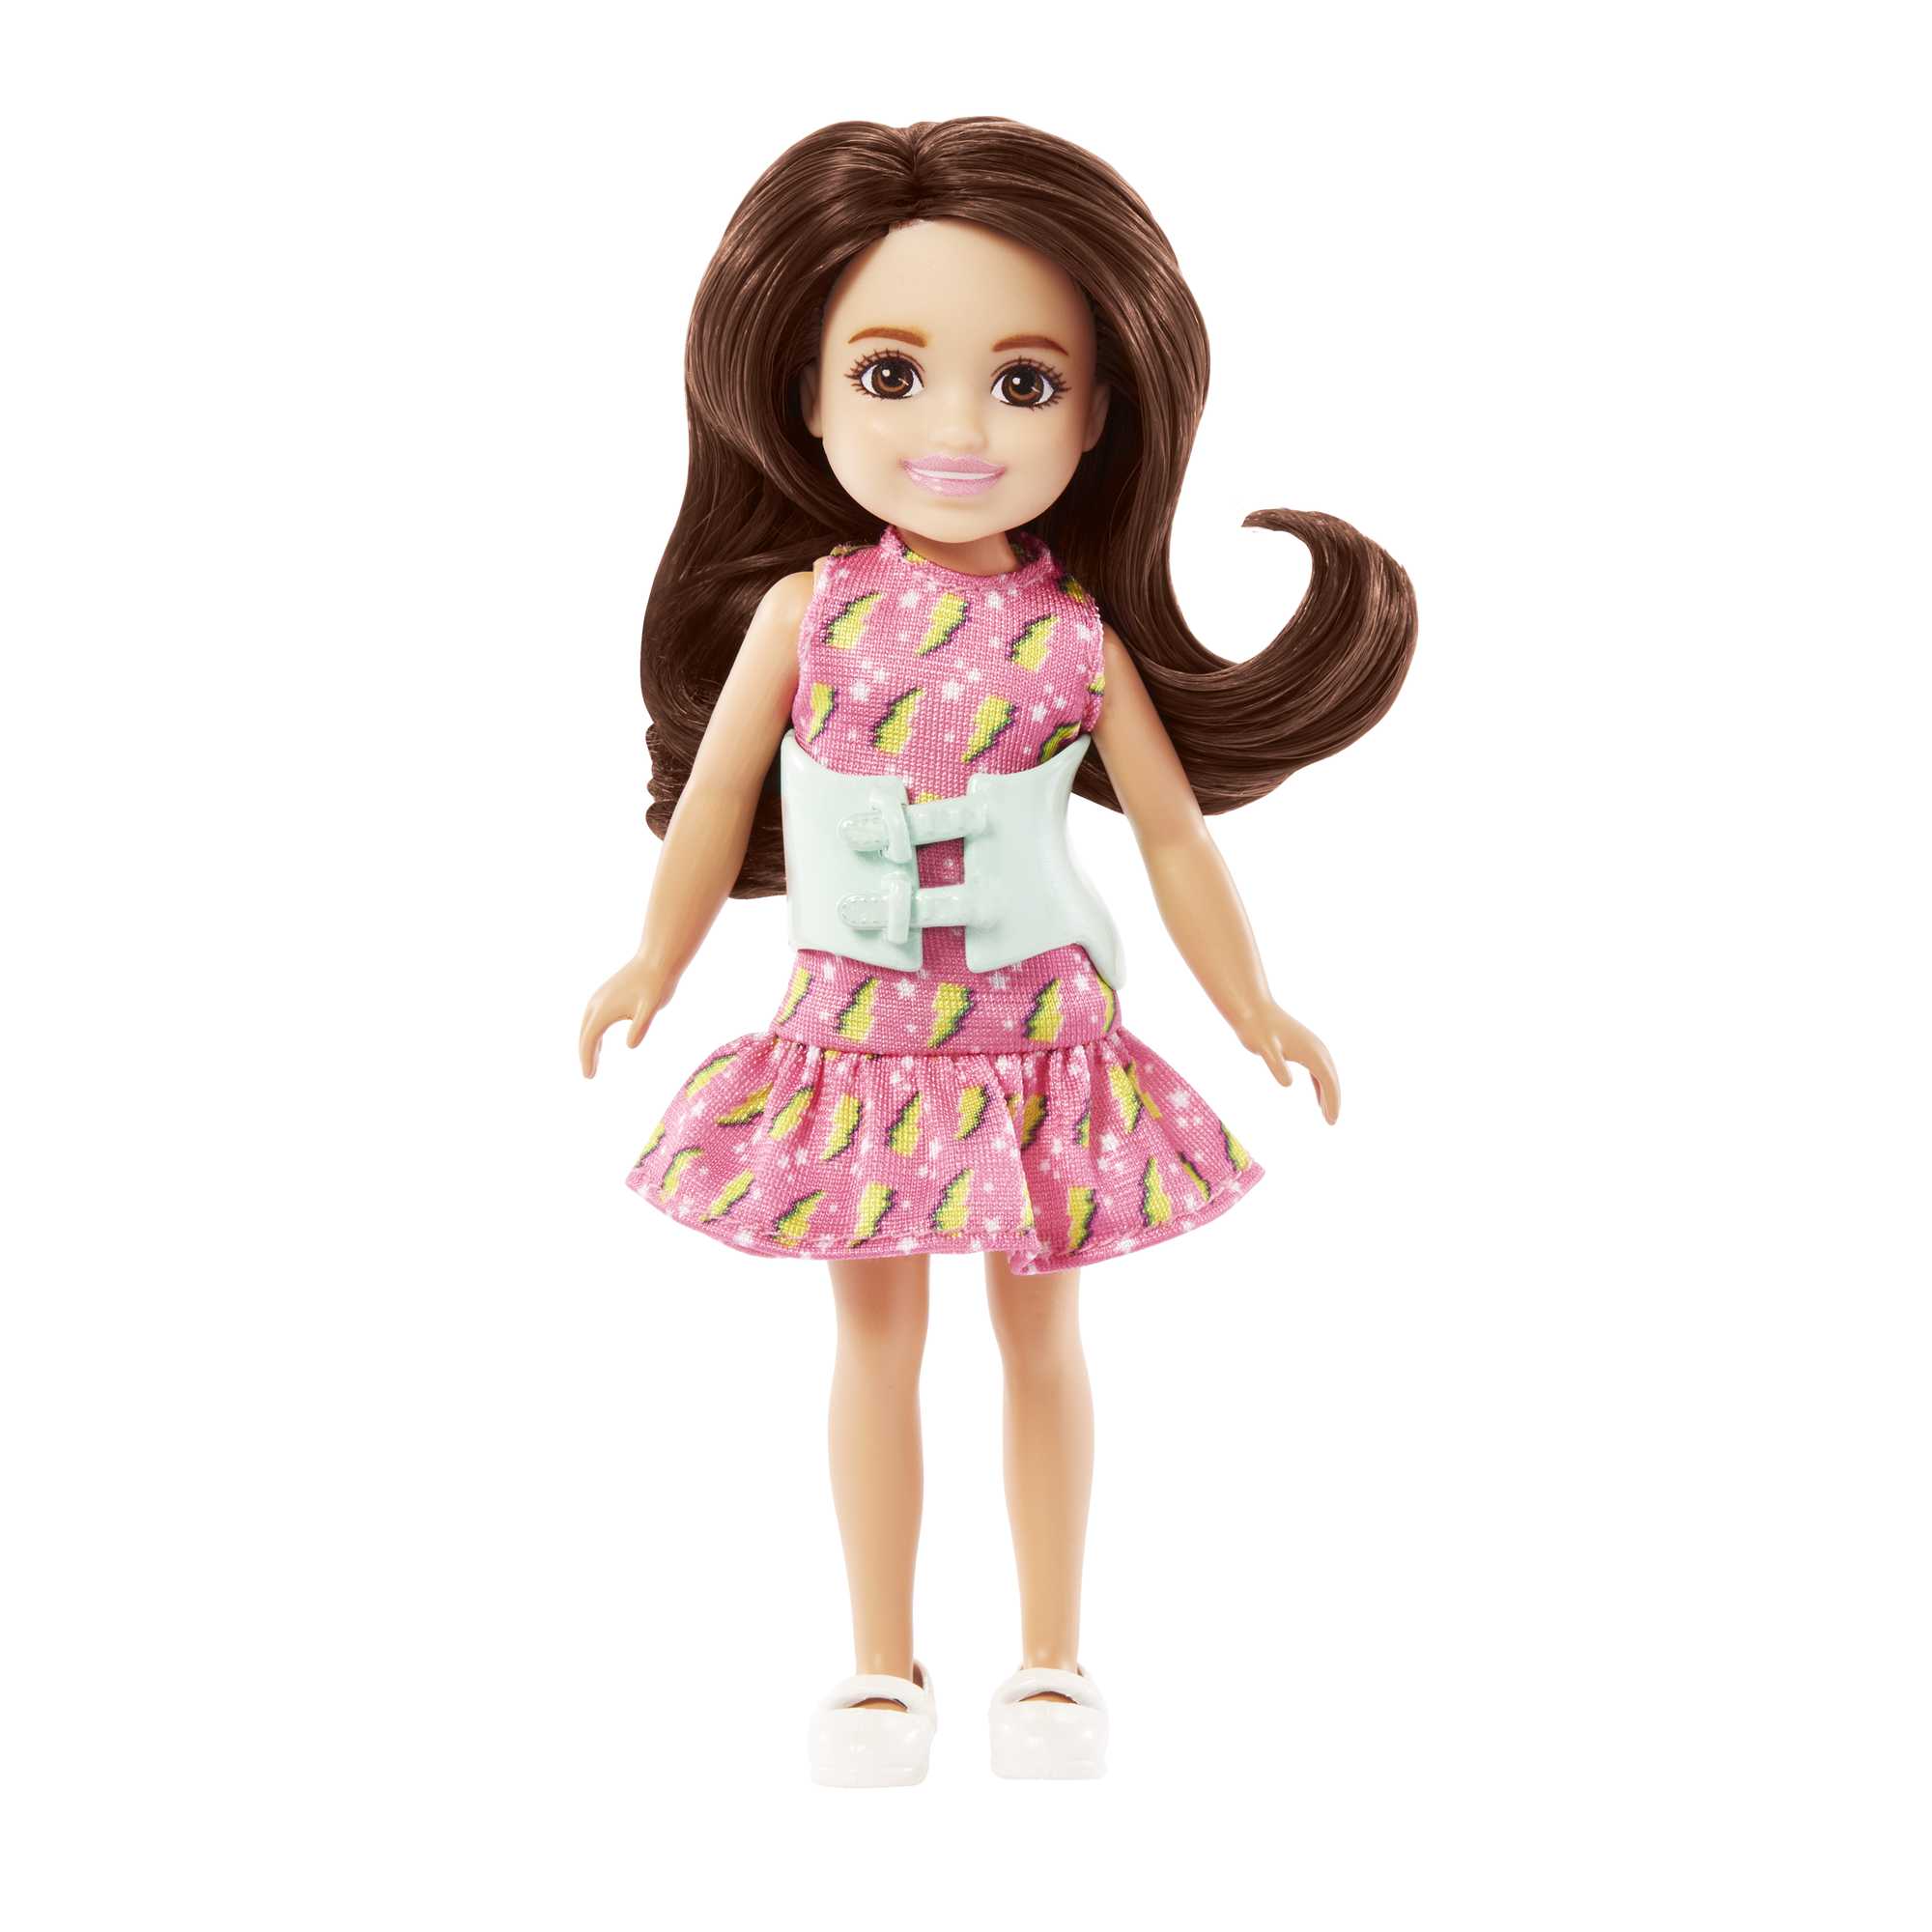 Explore Chelsea small dolls, like this adorable doll wearing a pink dress  and scoliosis brace for spine curvature. Shop Barbie dolls and gifts at  Shop.Mattel.com.